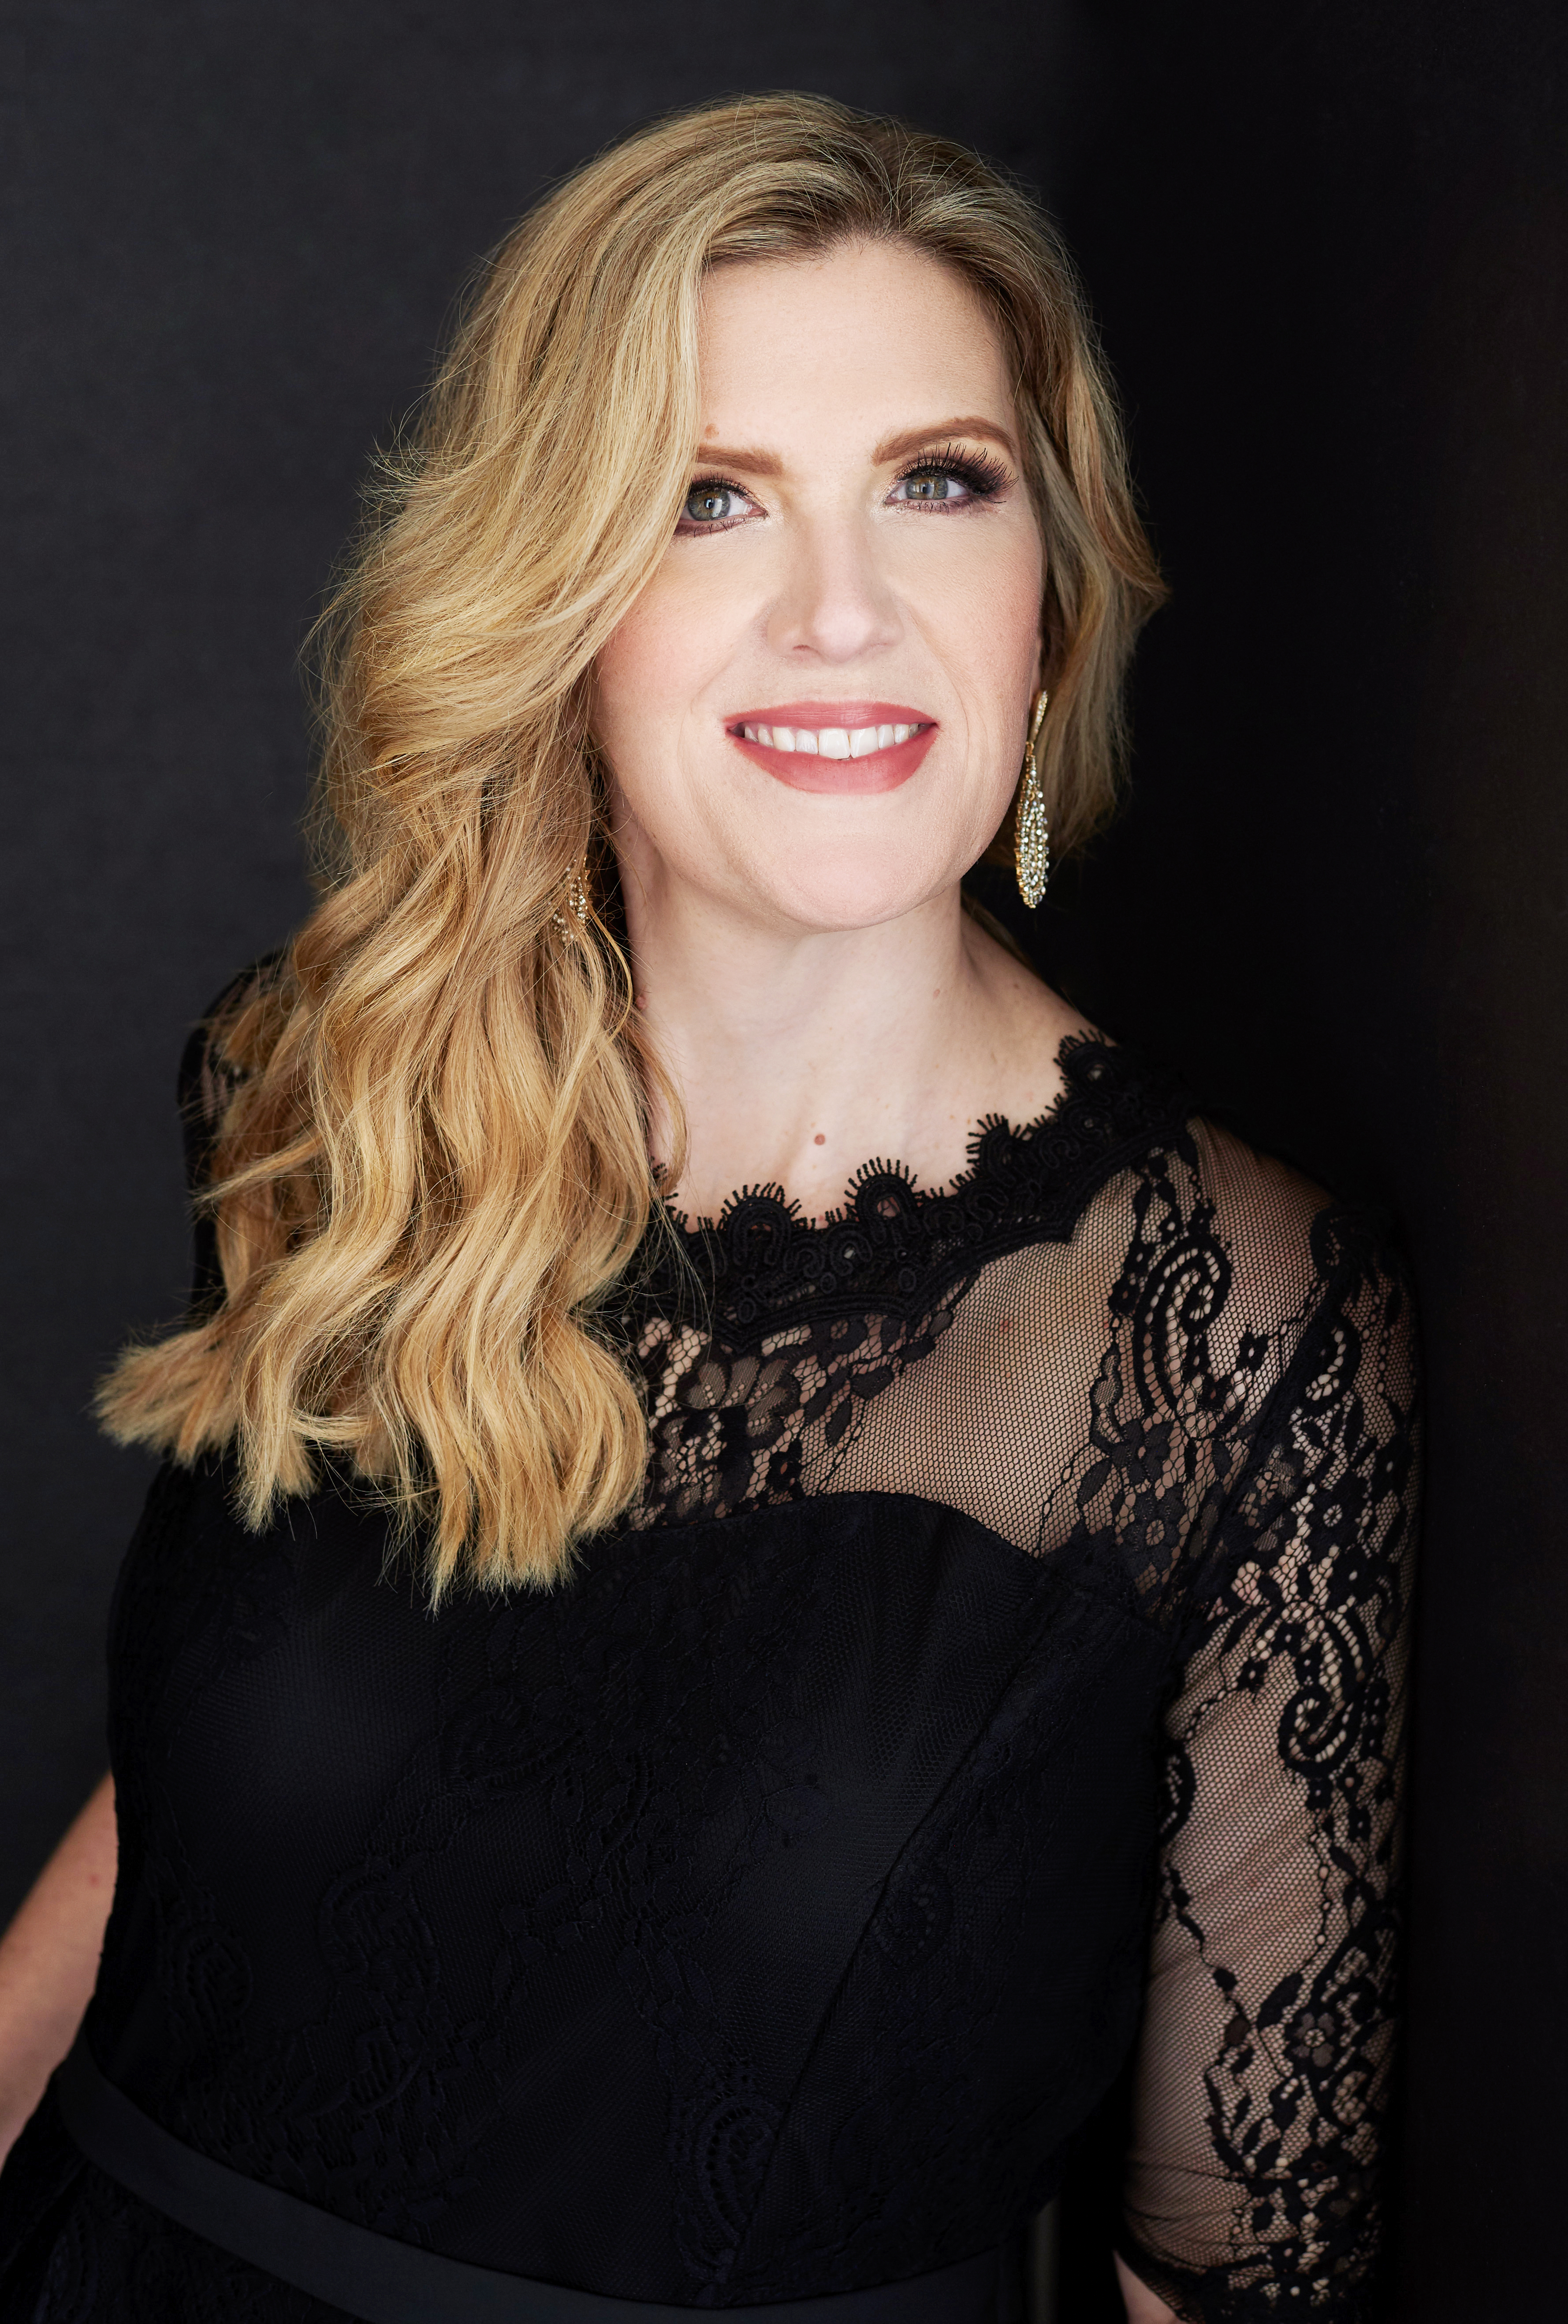 Beautiful smiling white woman with medium wavy blonde hair wearing a black lace top